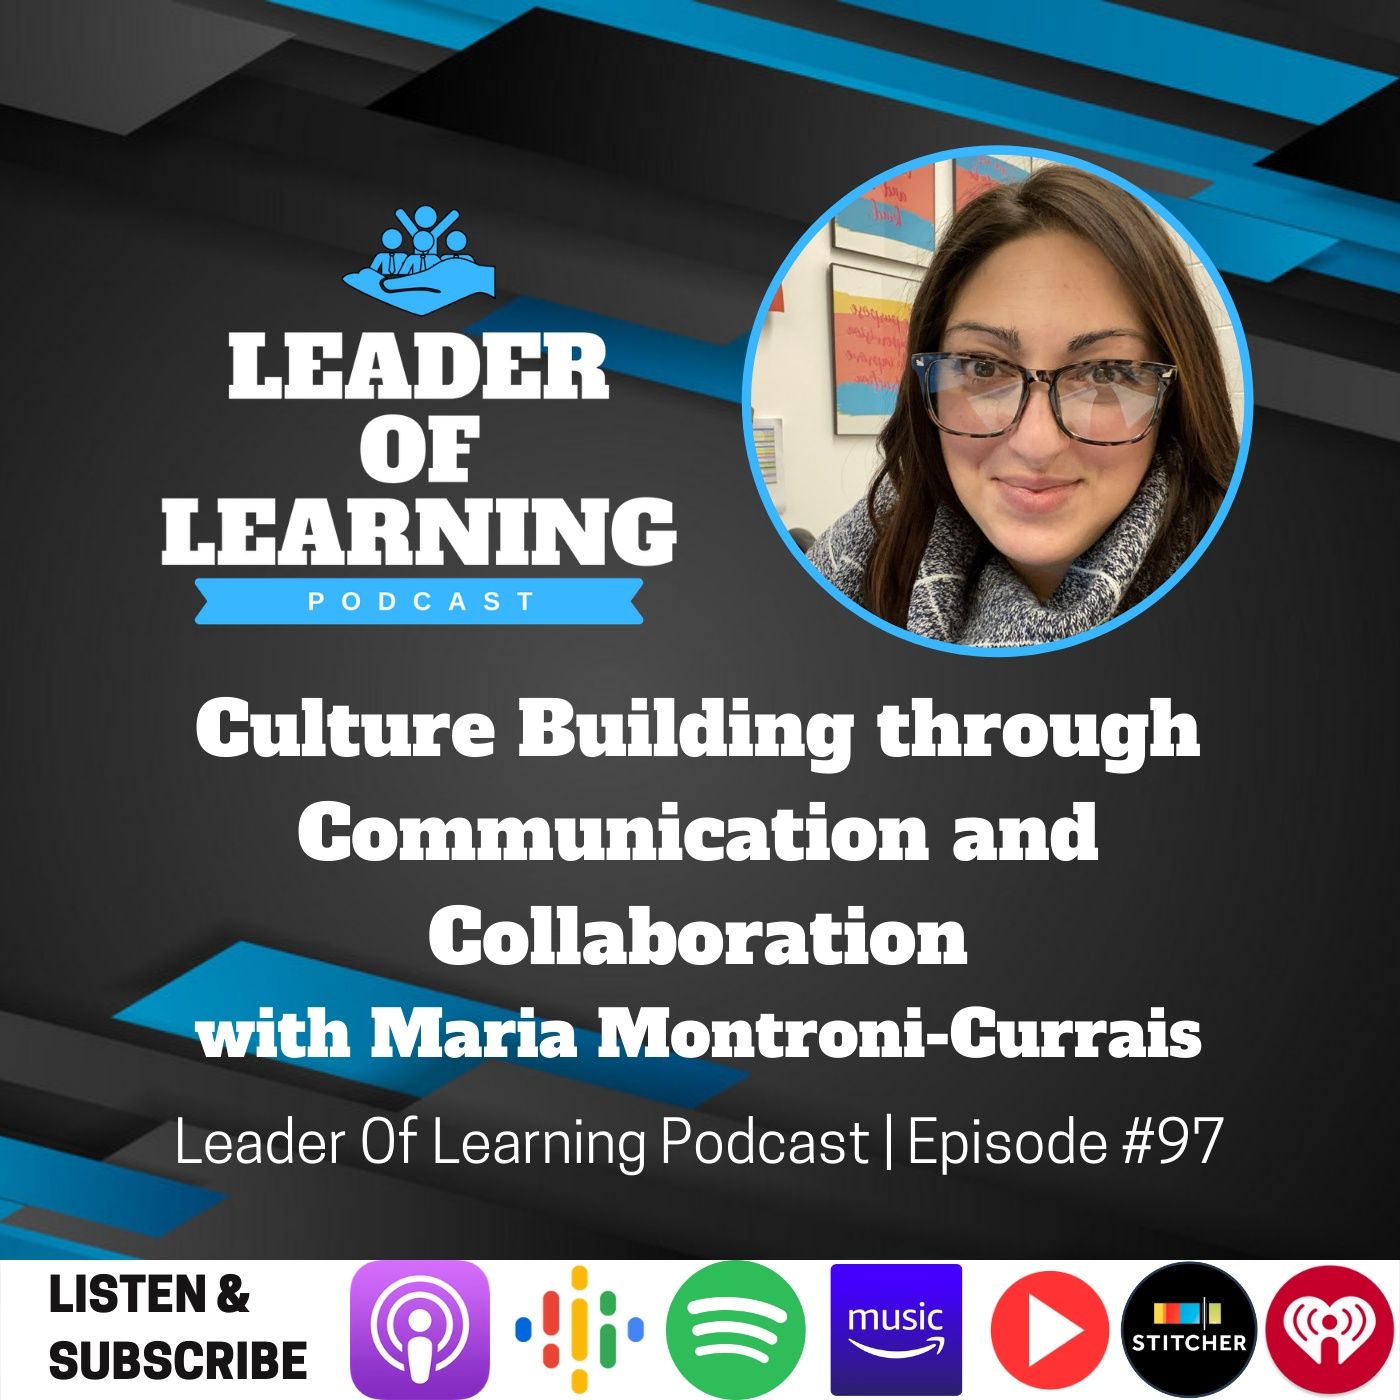 Culture Building through Communication and Collaboration with Maria Montroni-Currais Image